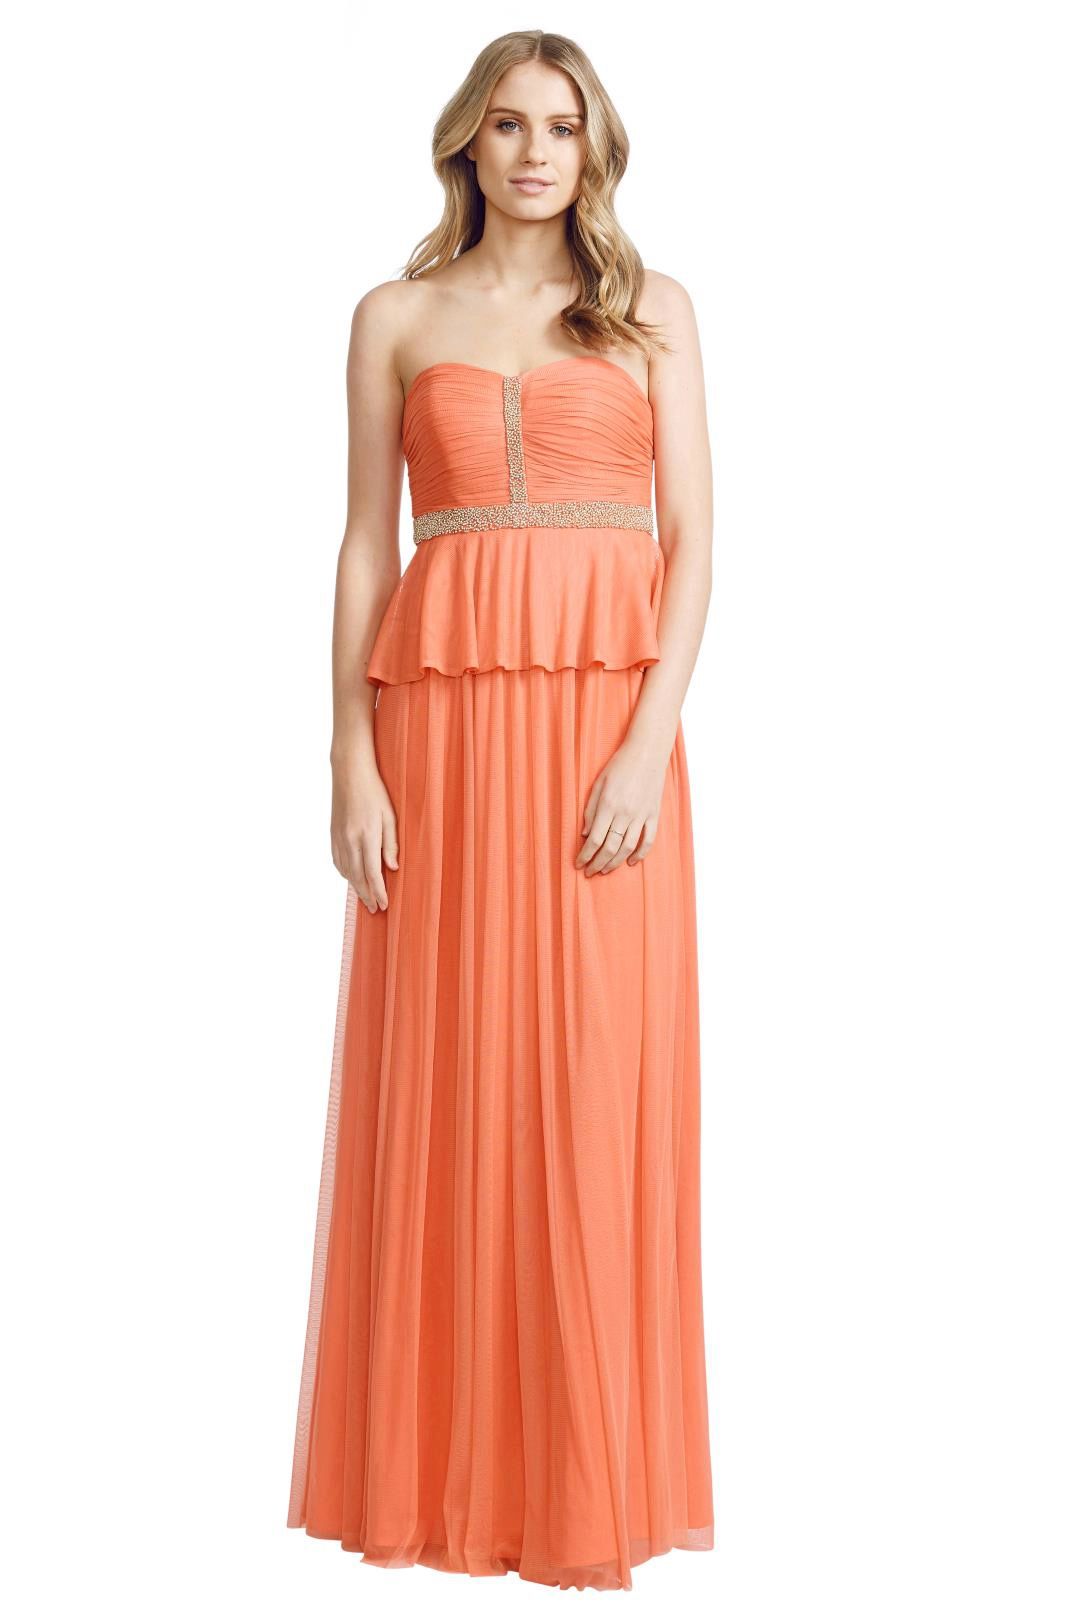 George - Kendra Gown - Orange - Front